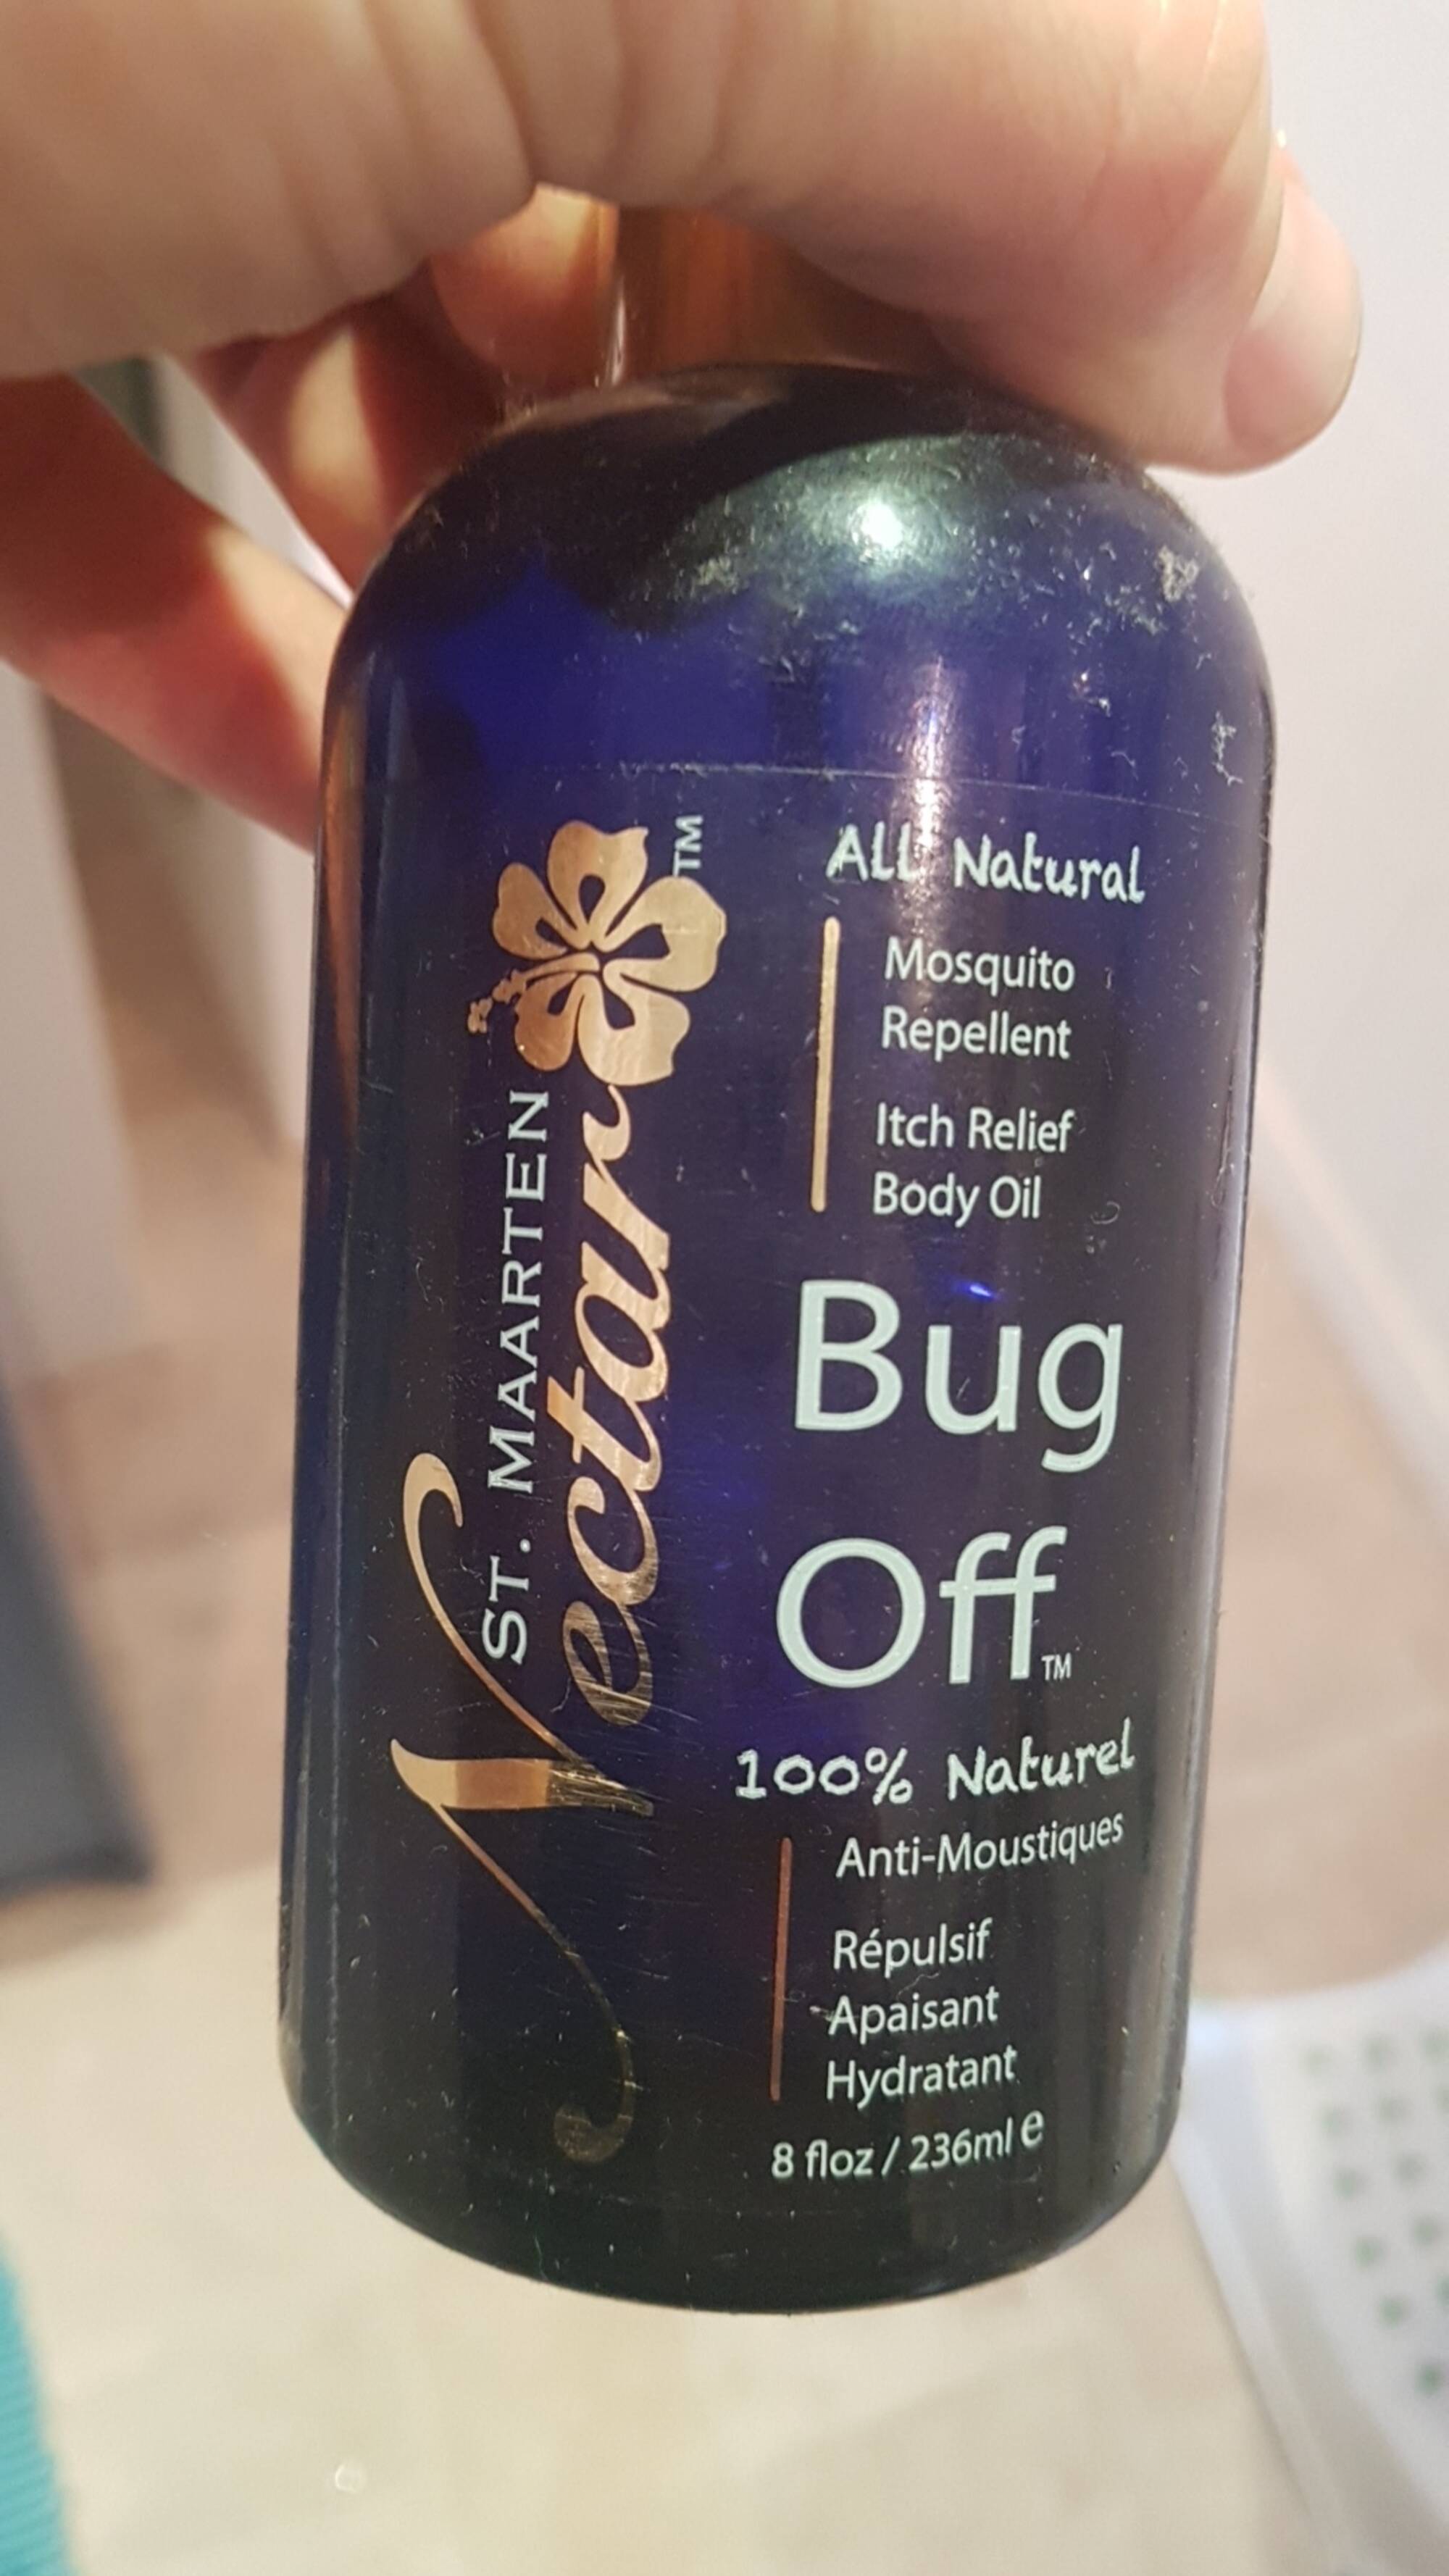 ST. MAARTEN NECTAR - Bug off - Anti-moustiques